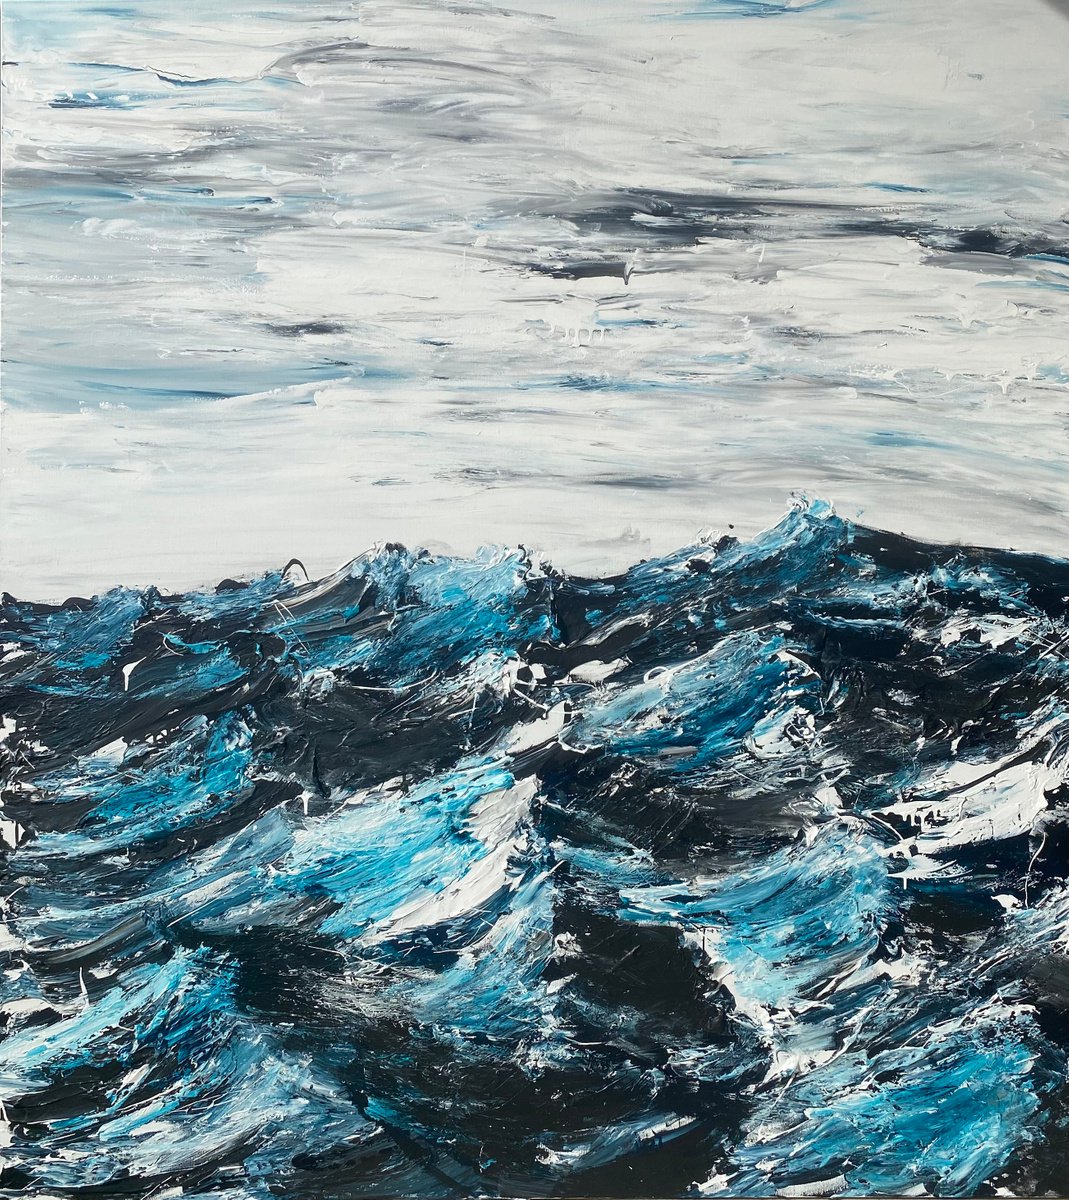 Stormy Ocean - Tumultuous Seas 2022 by Annette Spinks